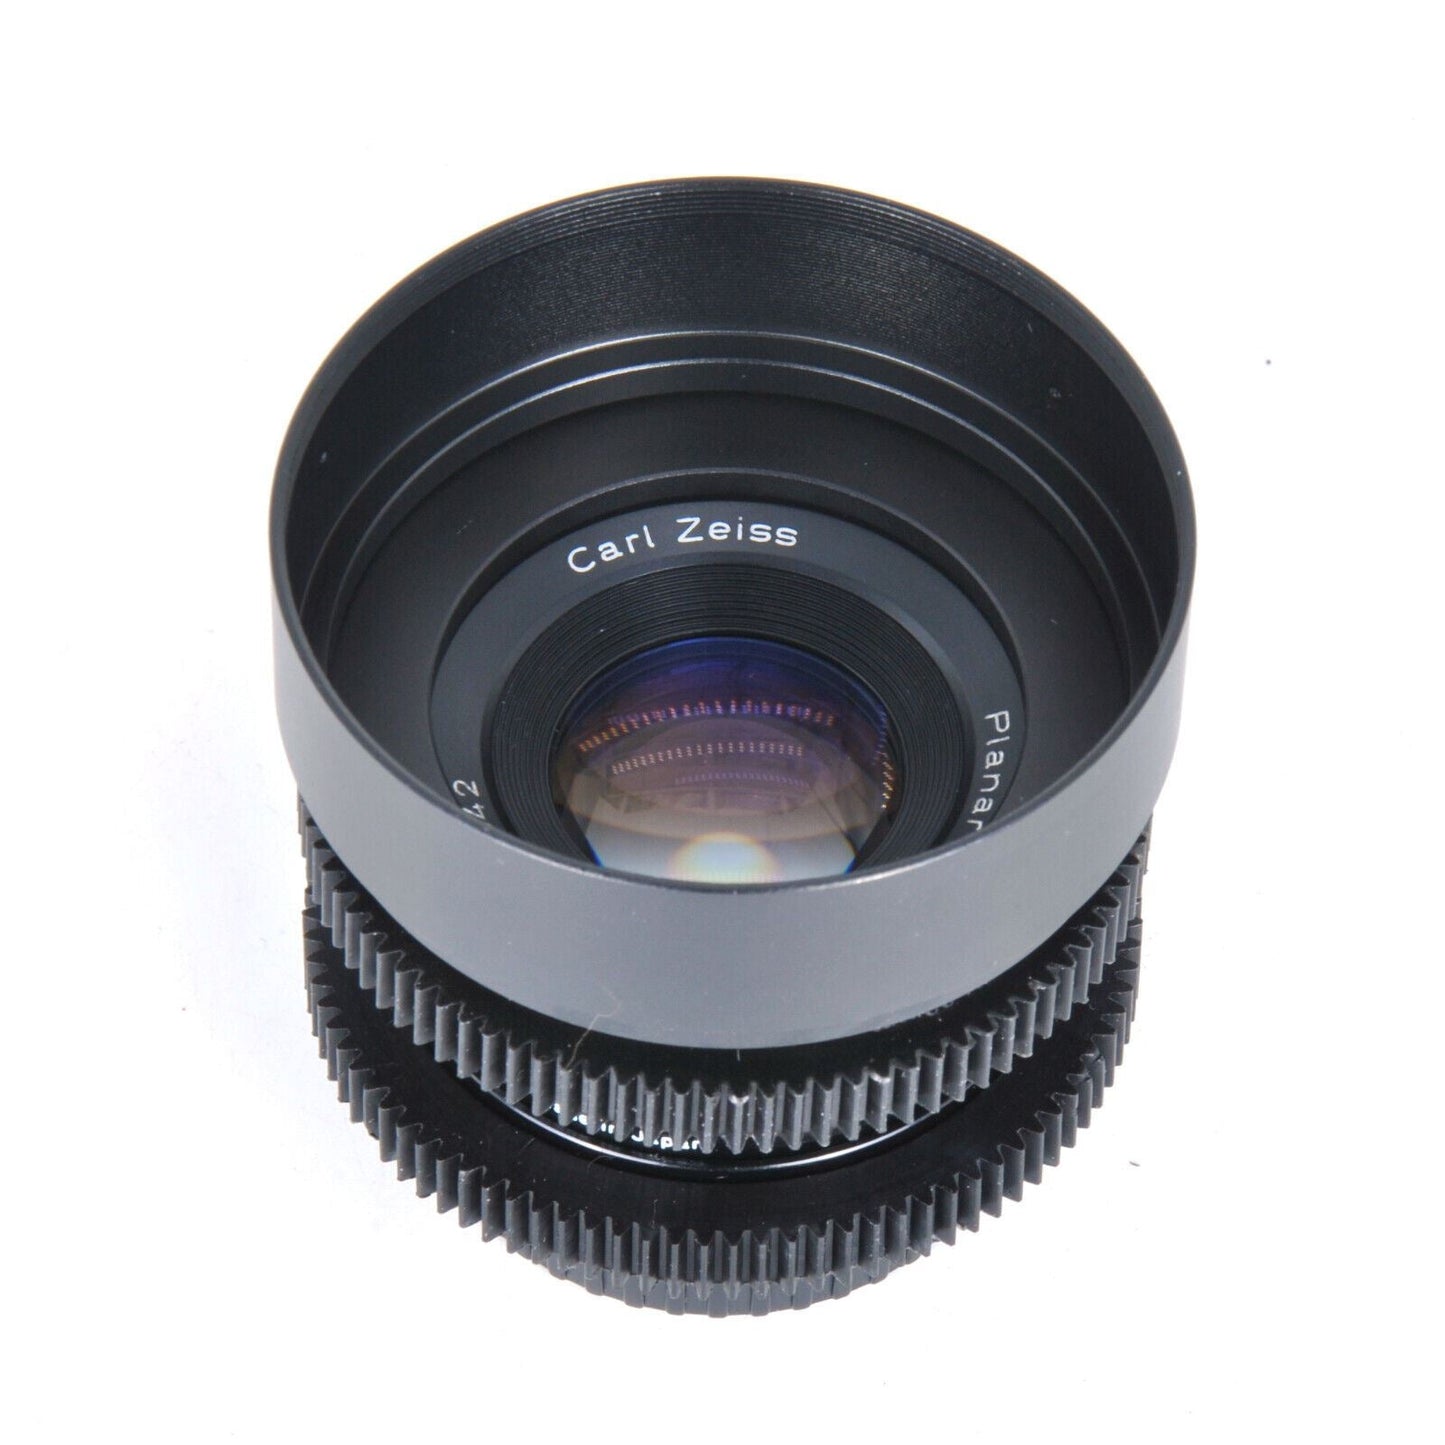 Cine Modded Carl Zeiss Planar T* 50mm F1.7 Prime Lens For Canon EF Mount! - TerPhoto Store